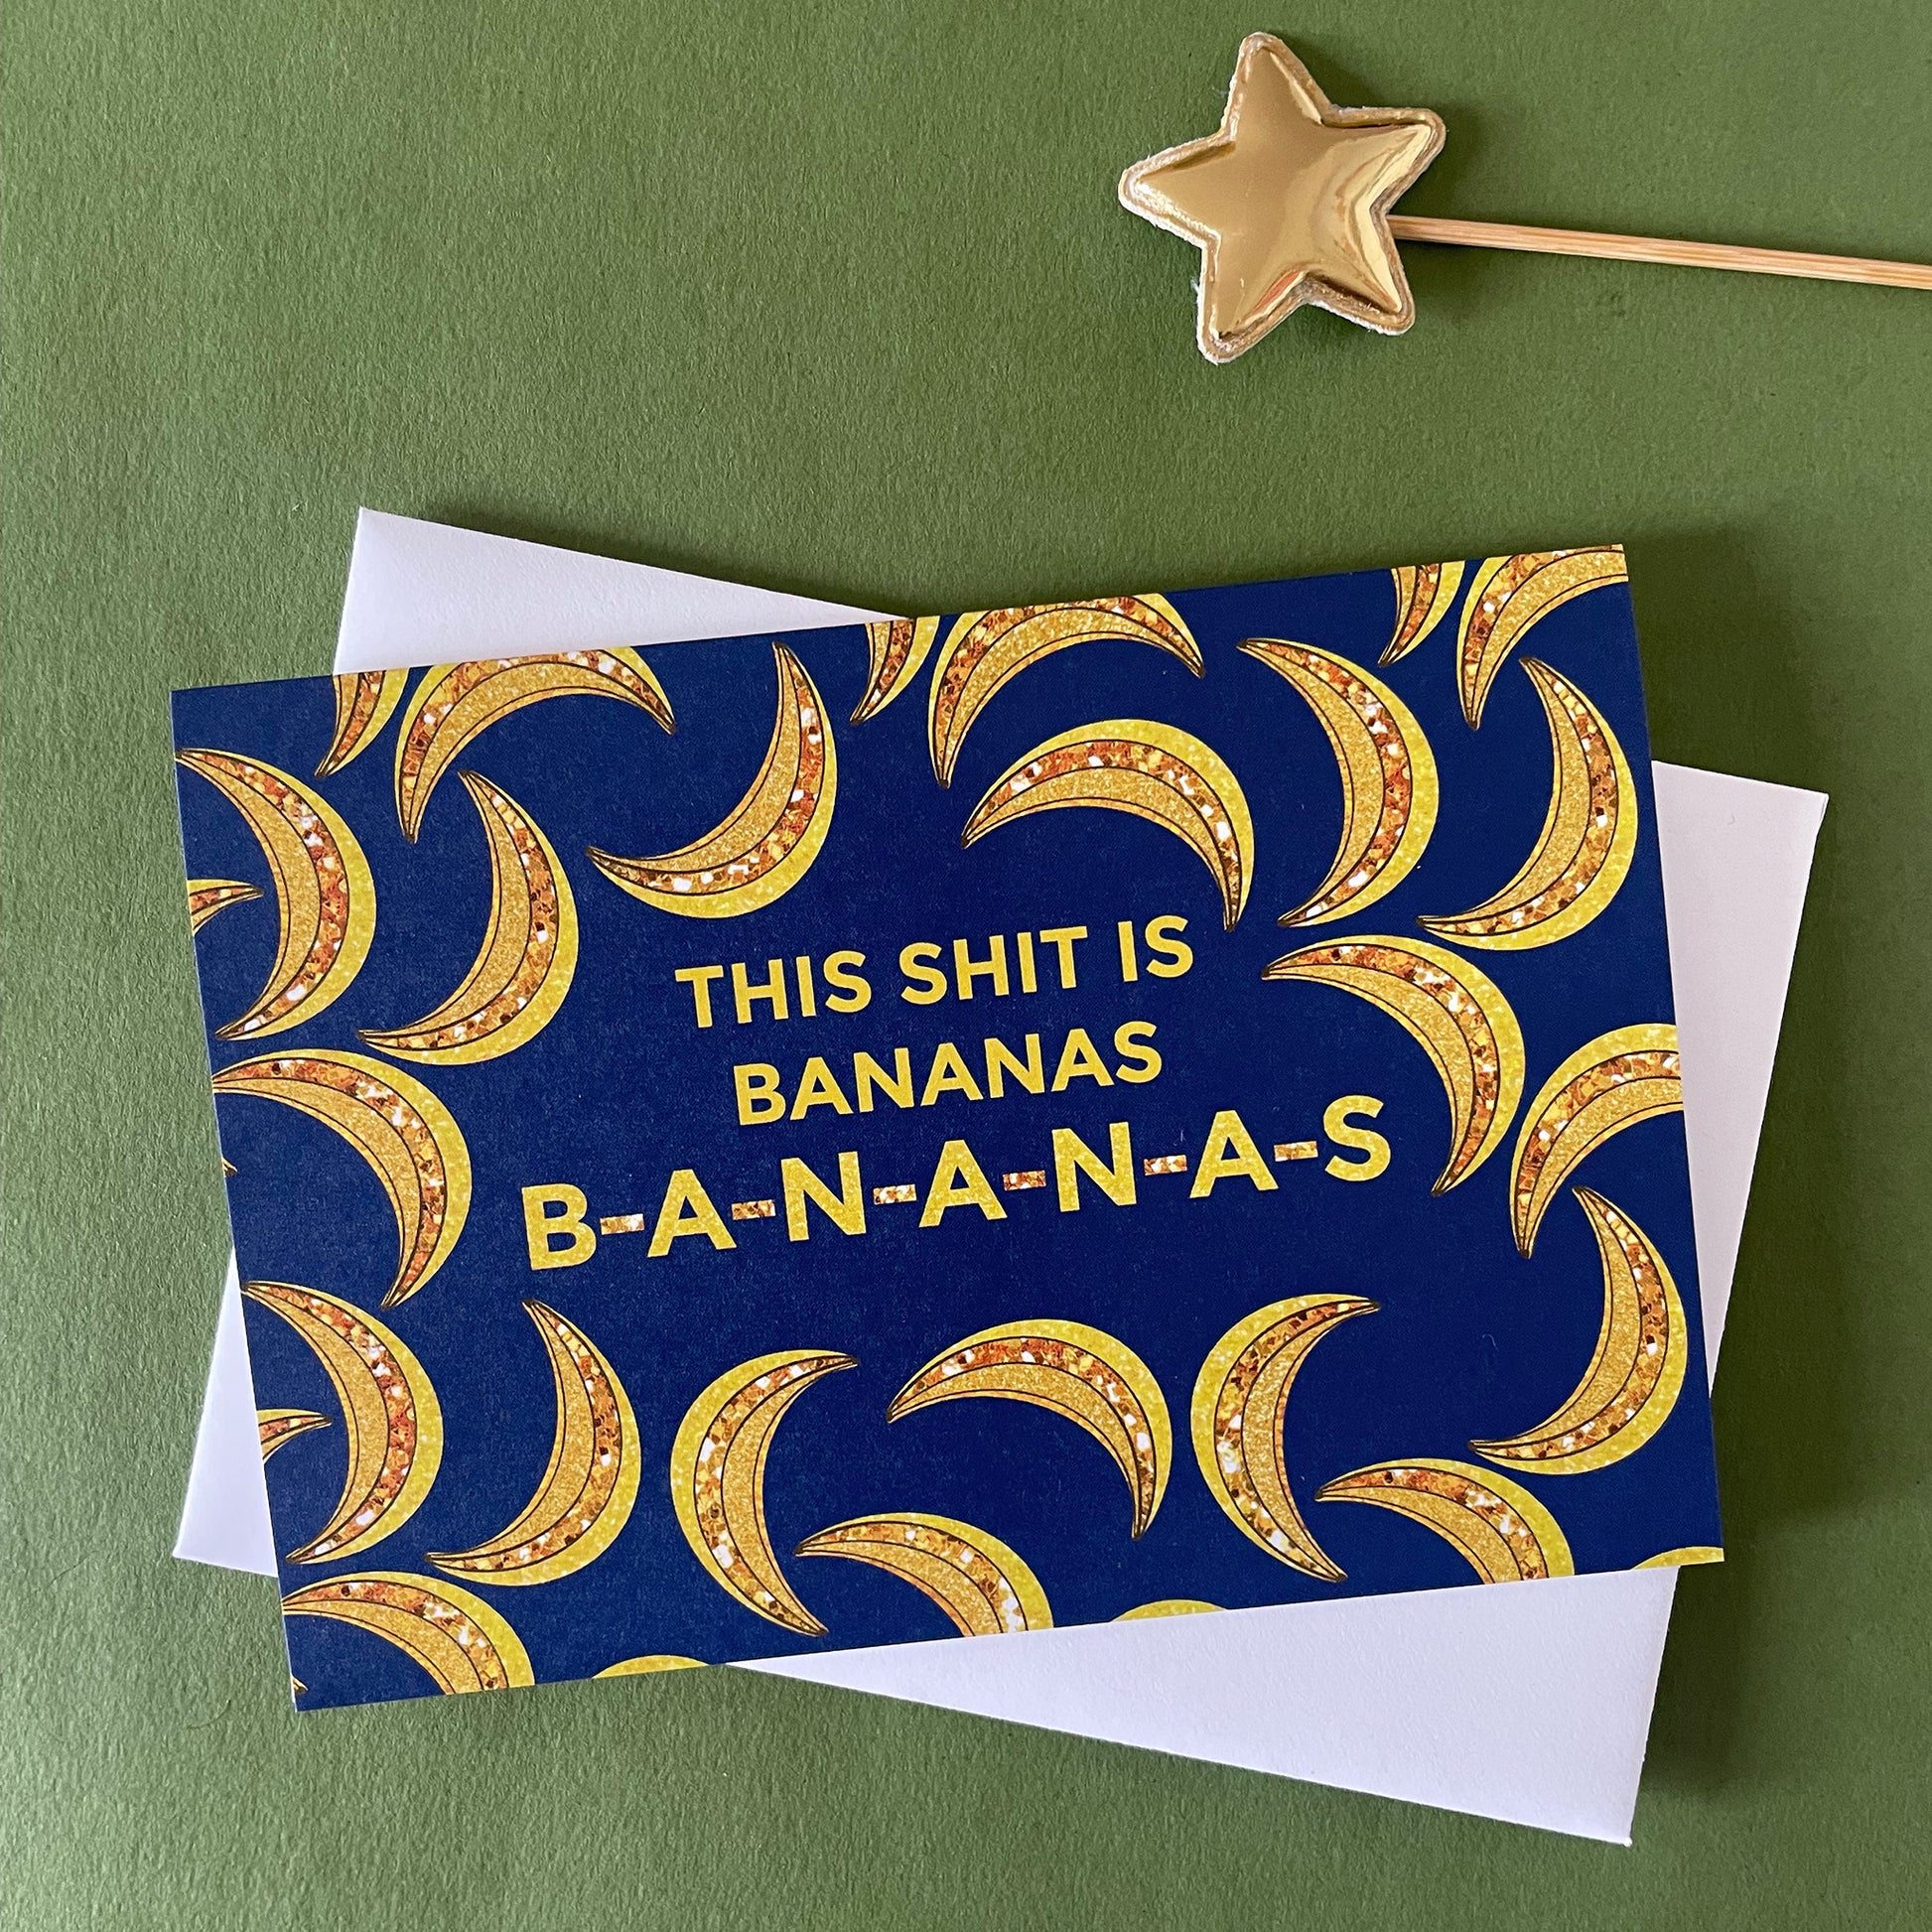 Image of a blue card on a green background. The card features bejewelled illustrations of bananas and the message 'This Shit is Bananas B-A-N-A-N-A-S.